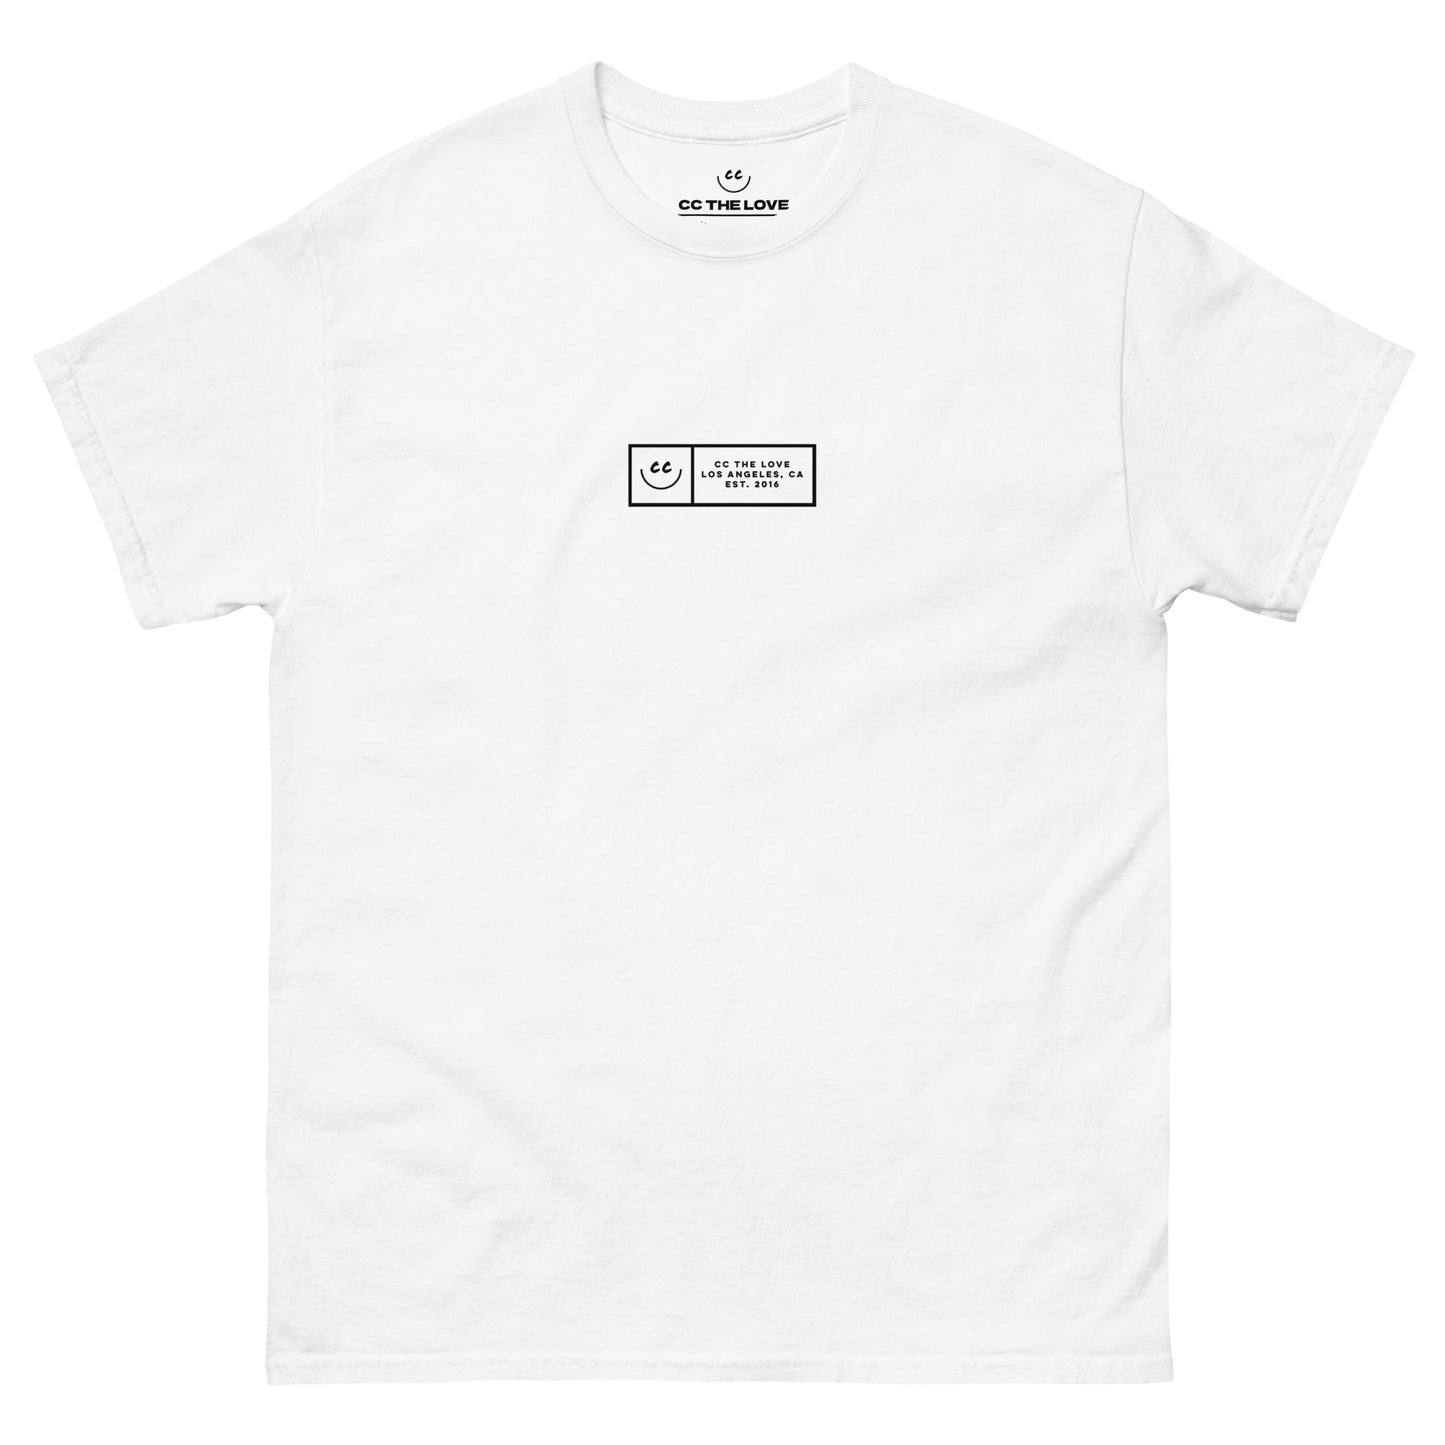 Boxed Smile Tee in White - Short Sleeve